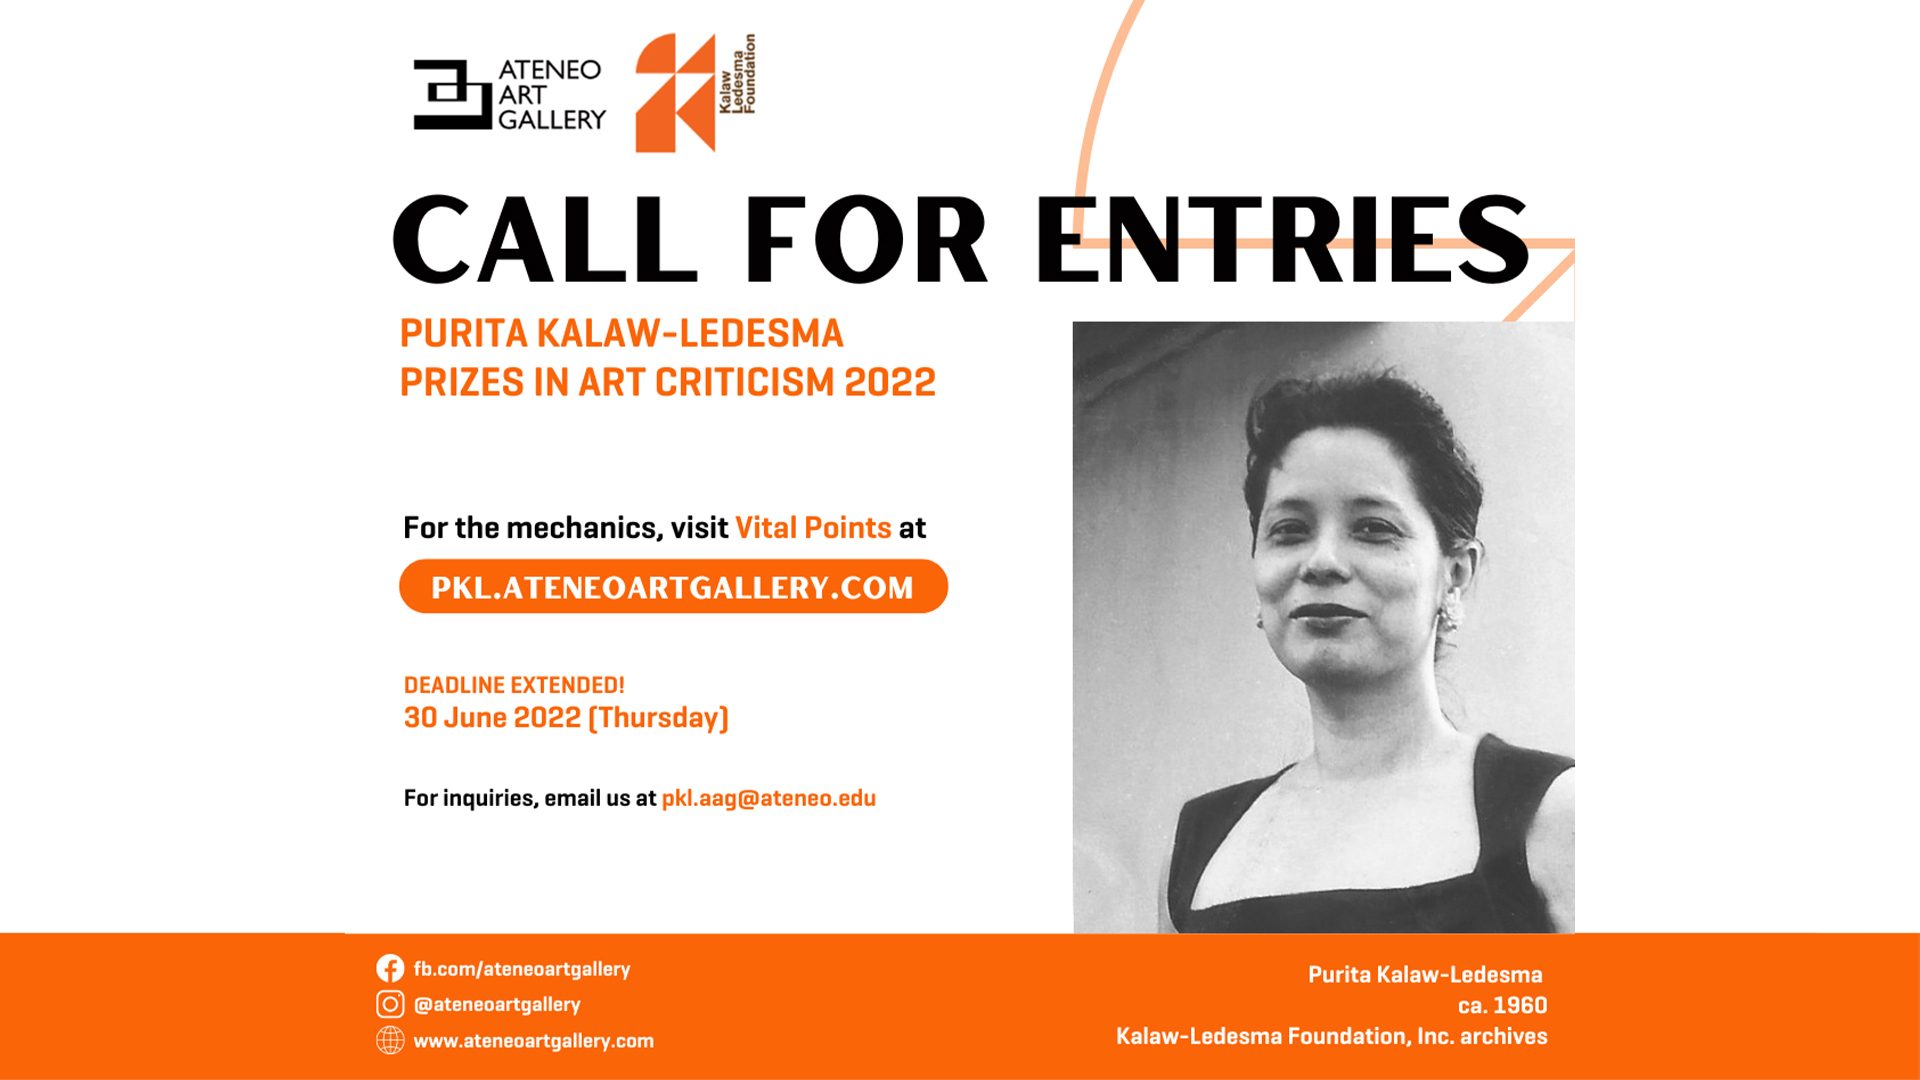 Last call for entries for the Purita Kalaw-Ledesma Prizes in Art Criticism